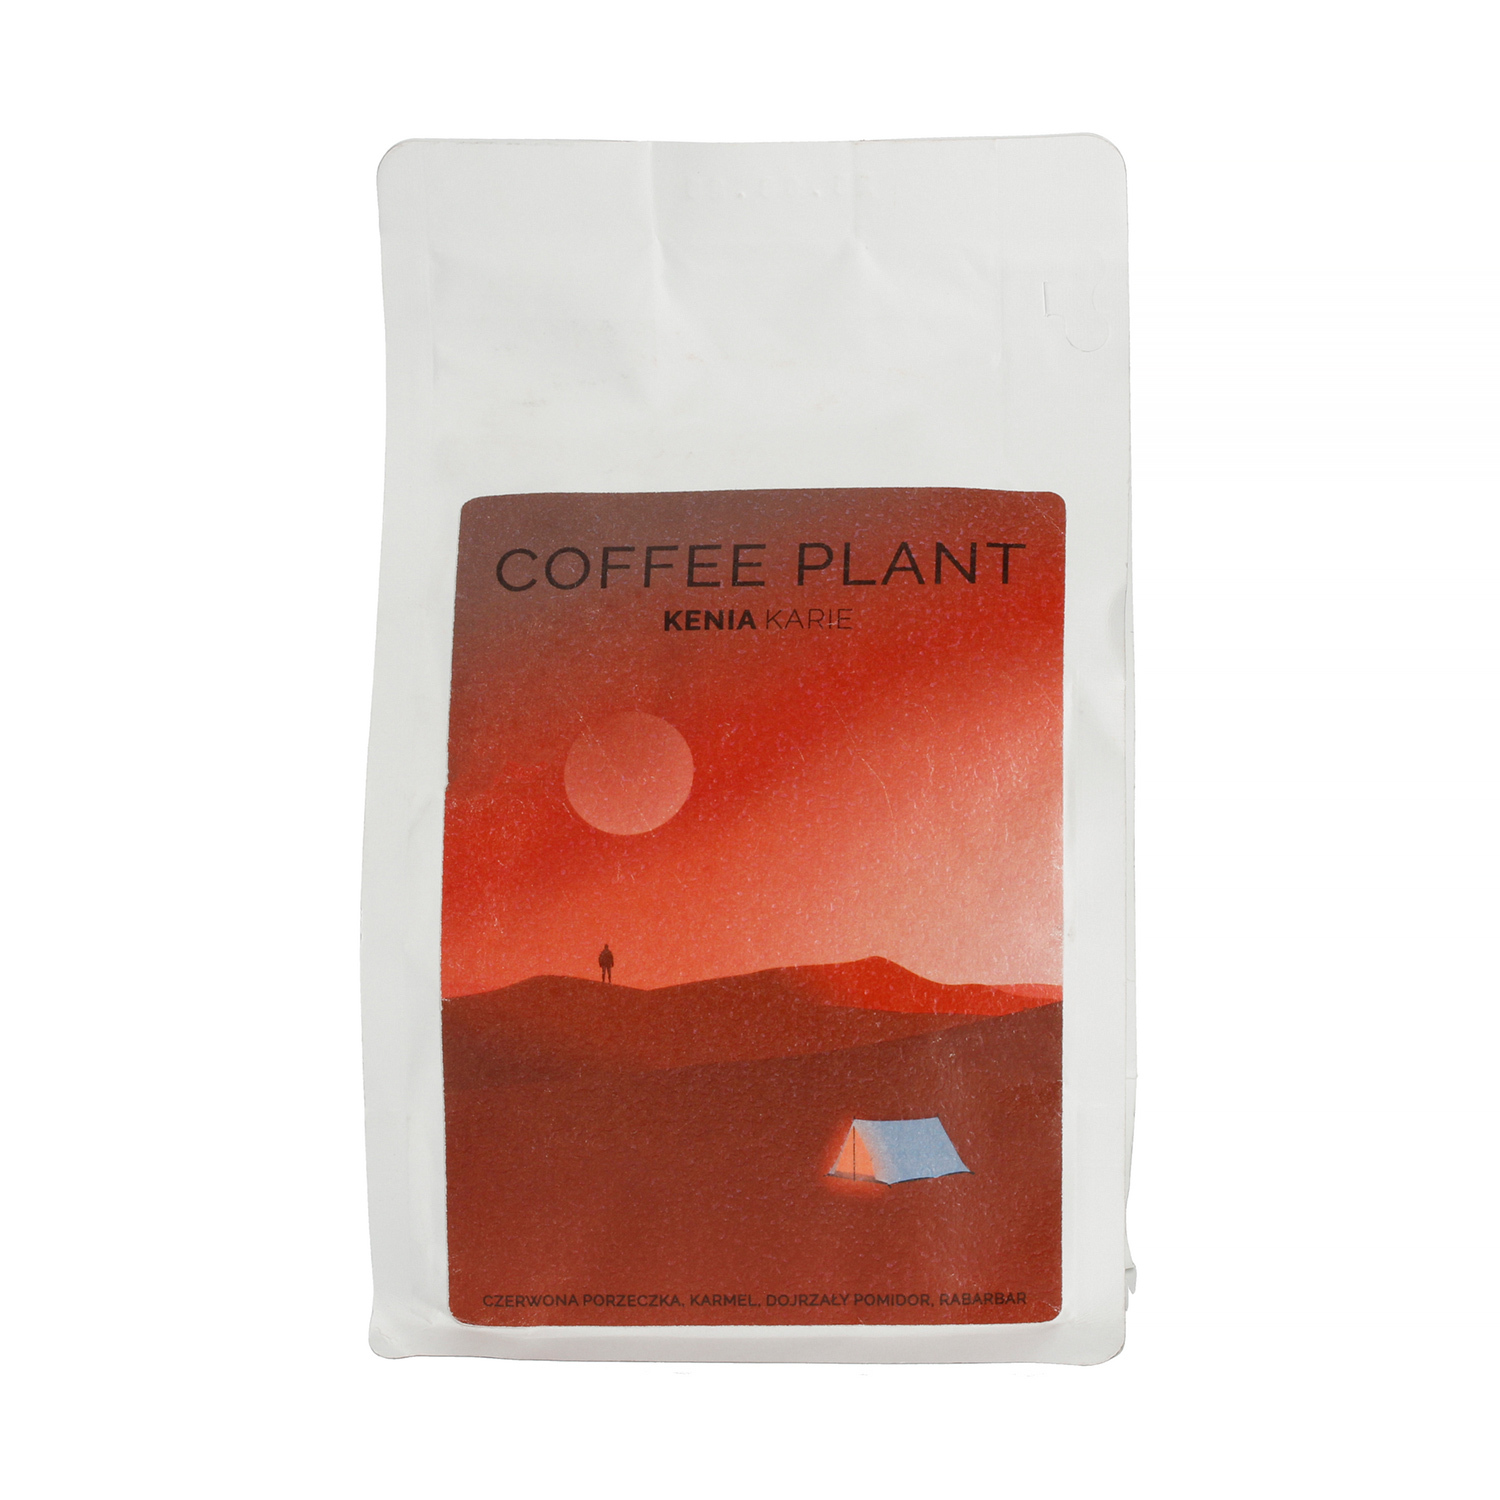 COFFEE PLANT - Kenia Karie Top AA Washed Filter 250g